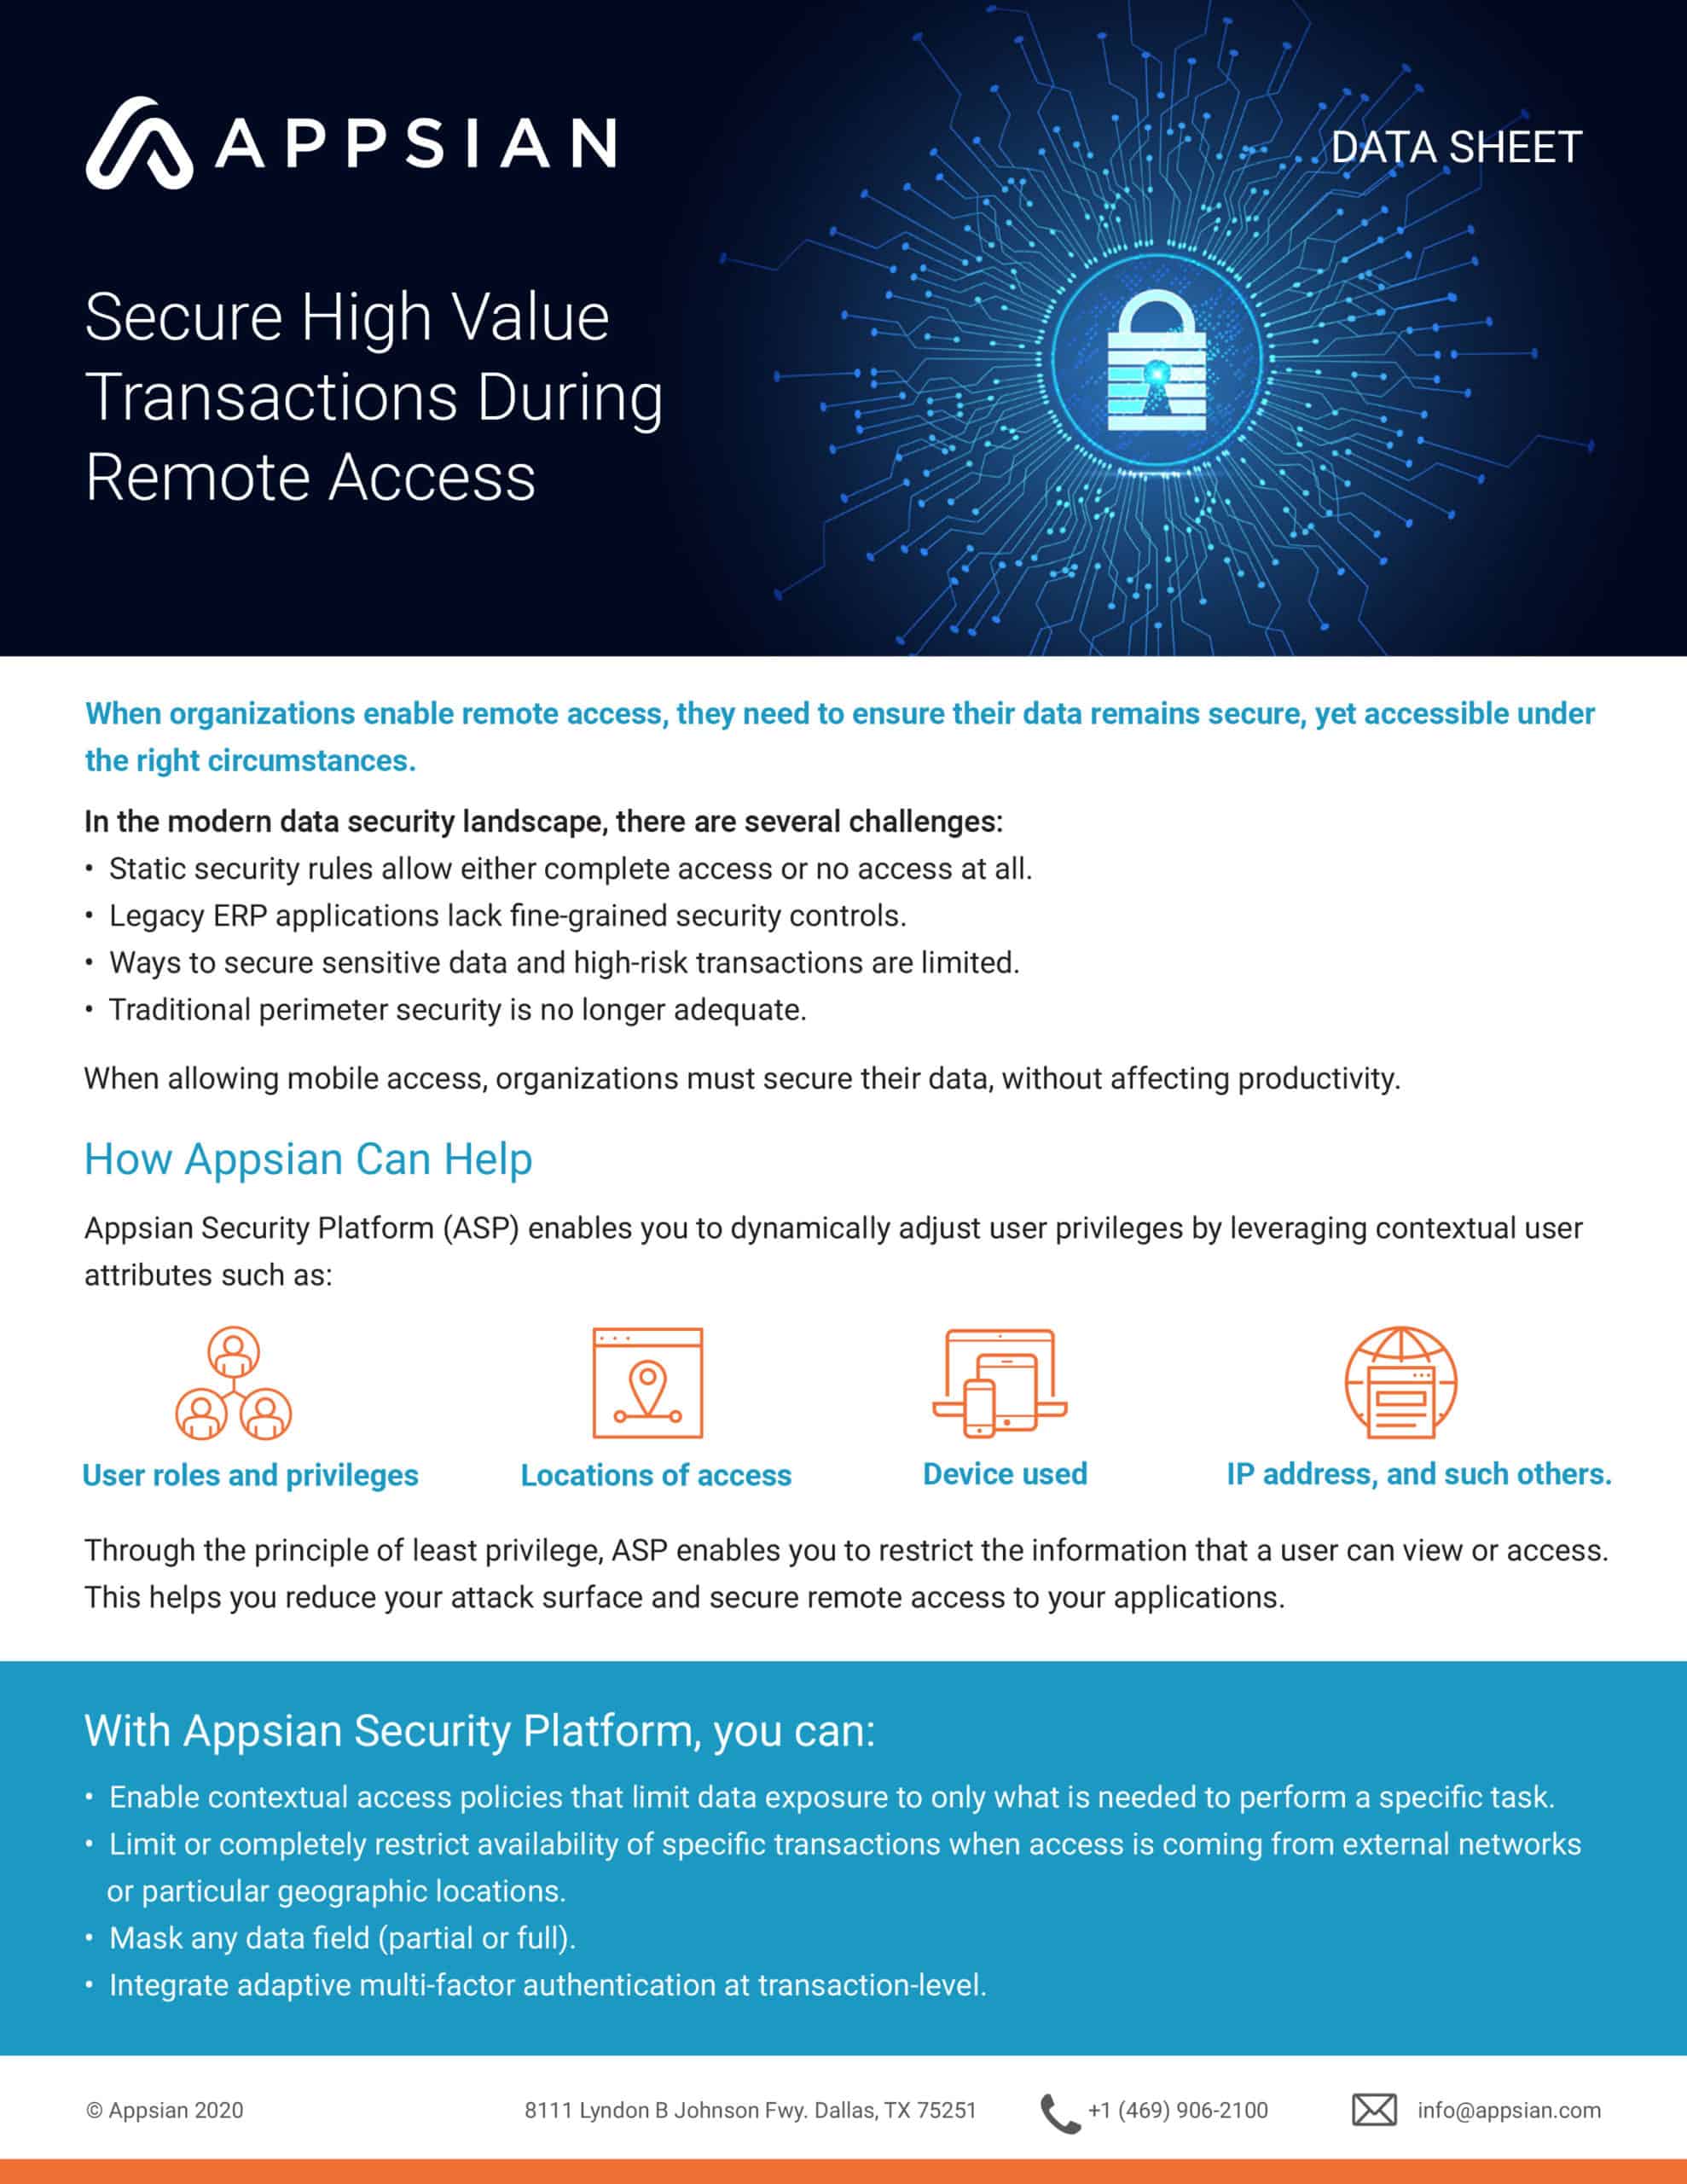 Secure High Value Transactions During Remote Access